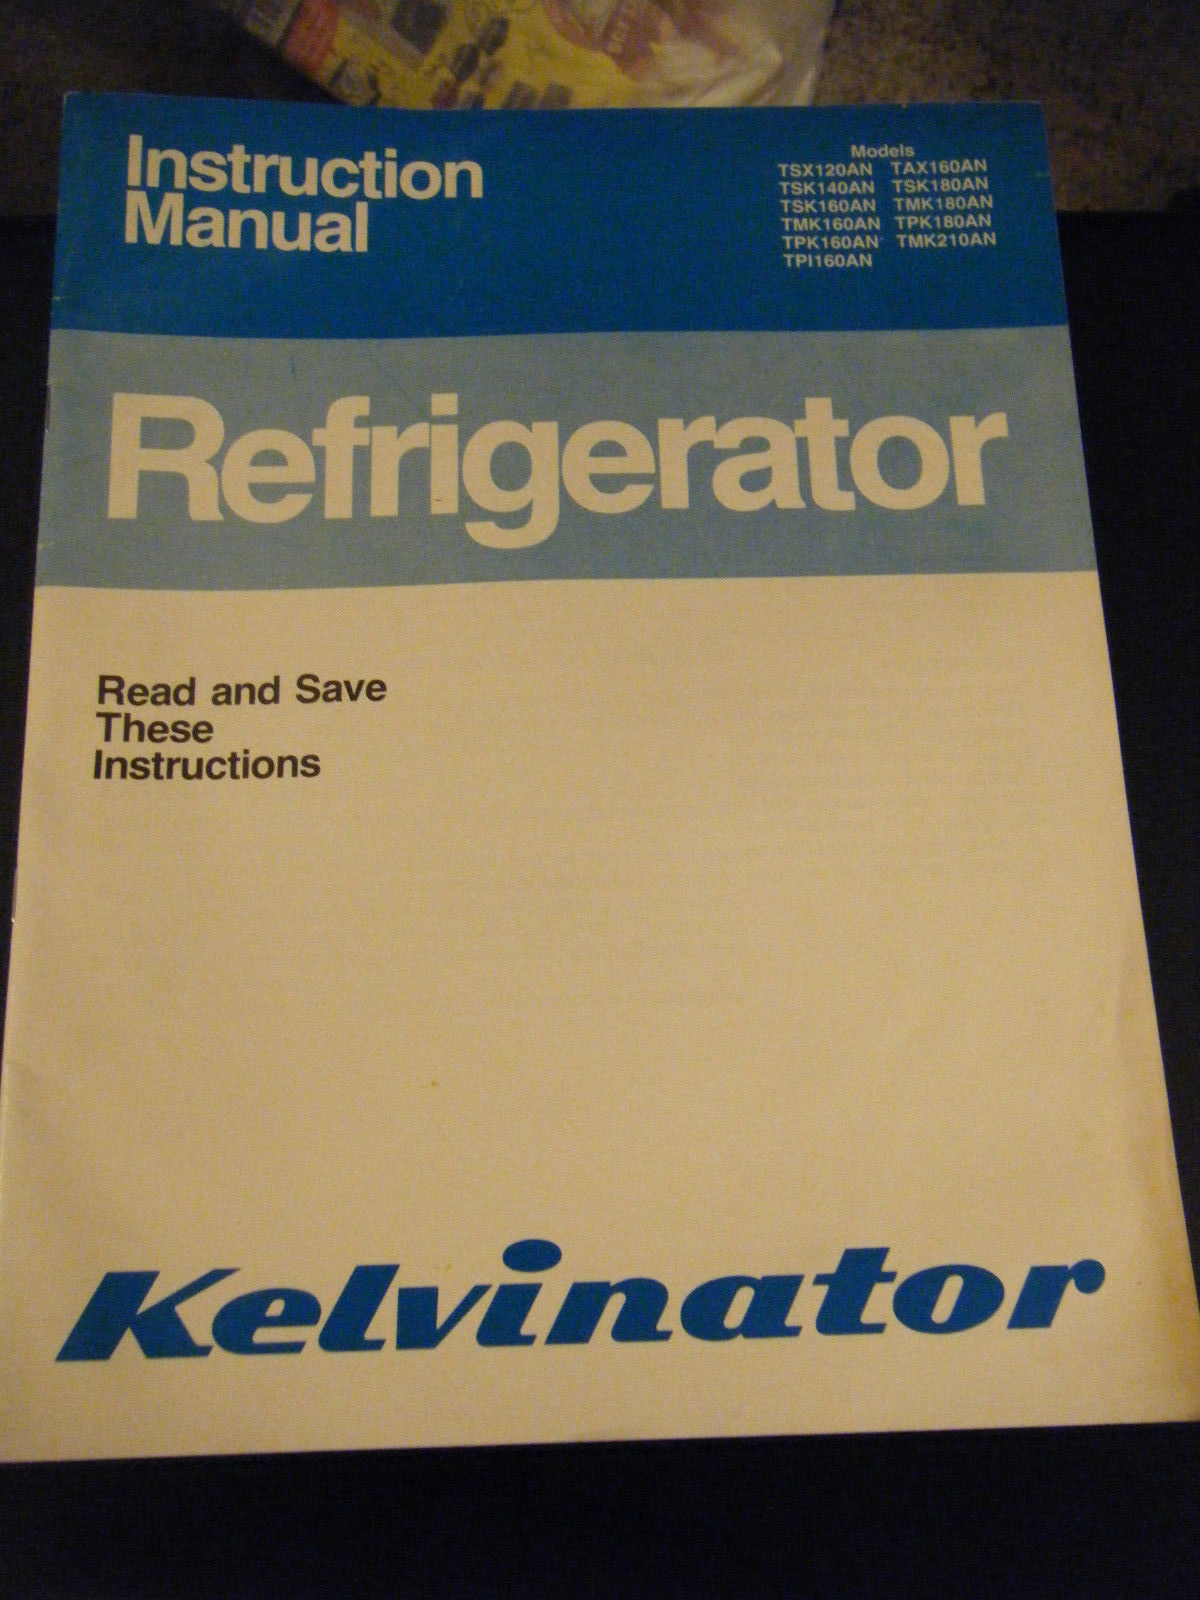 Primary image for Vintage 1982 Kelvinator Refrigerator Instruction Manual 120AN/140AN/160AN/180AN